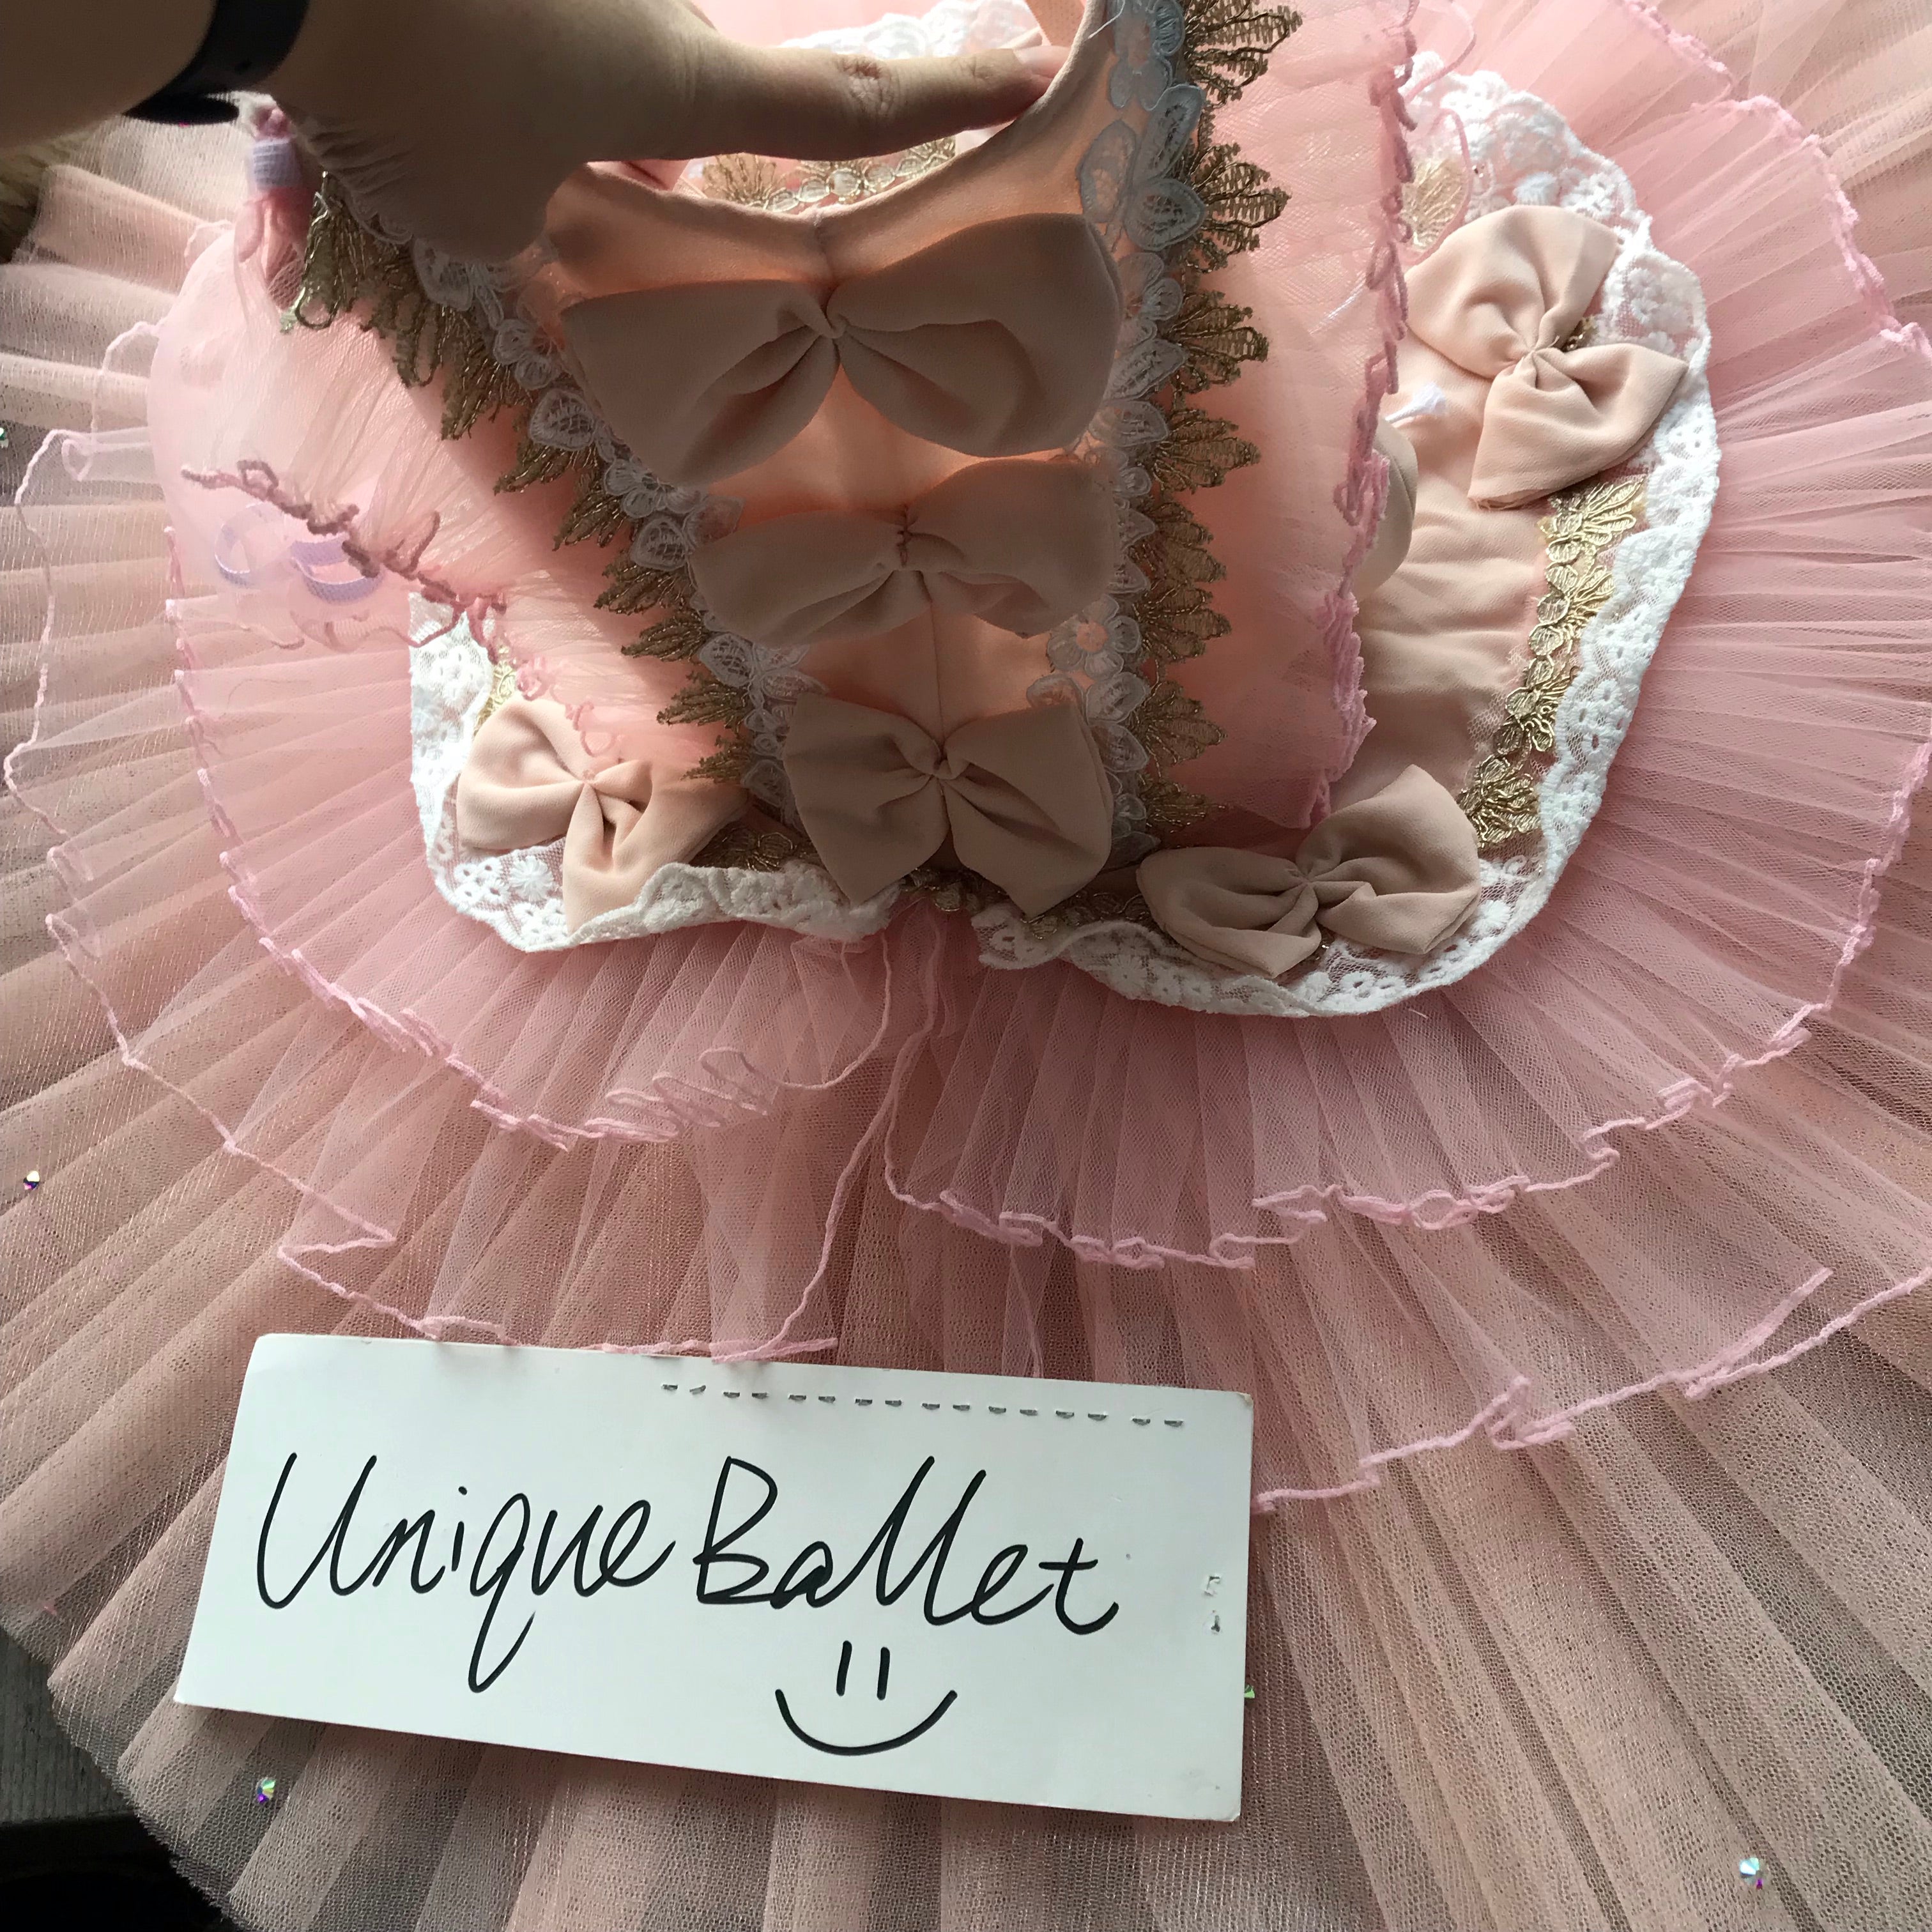 Professional Peach Pink Bowknot Doll Fairy Coppelia Classical Ballet TuTu Costume With Hooks